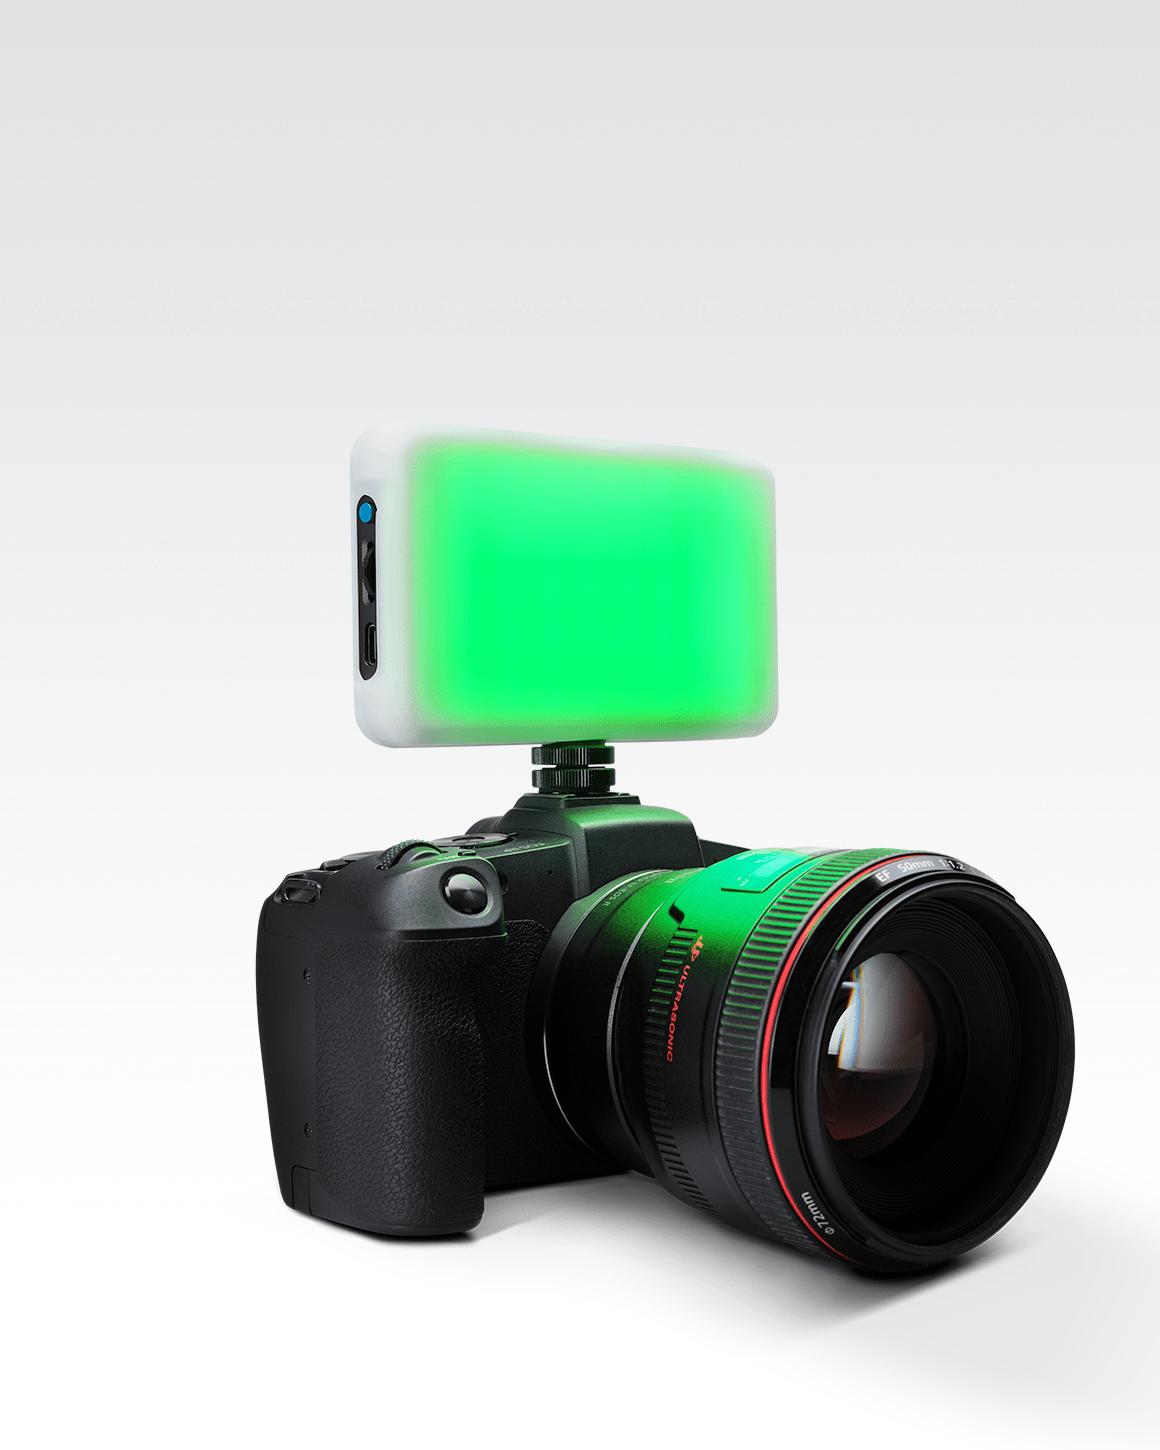 Lume Cube RGB Panel Go mounted on Sony camera with Green LEDs glowing behind white Silicone Diffuser sleeve.